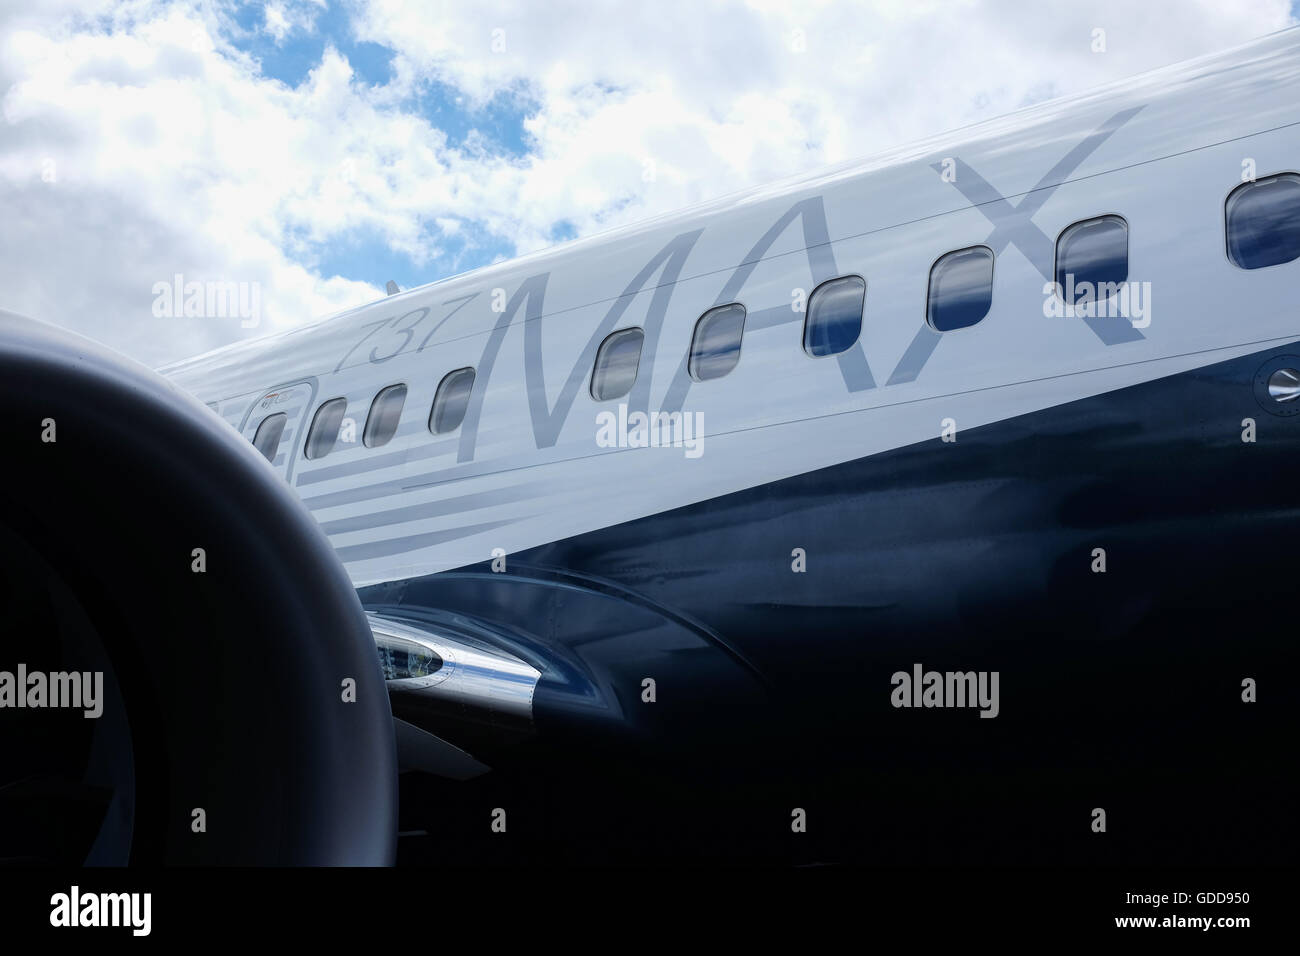 Part of the Boeing 737 Max 8 aircraft. Stock Photo